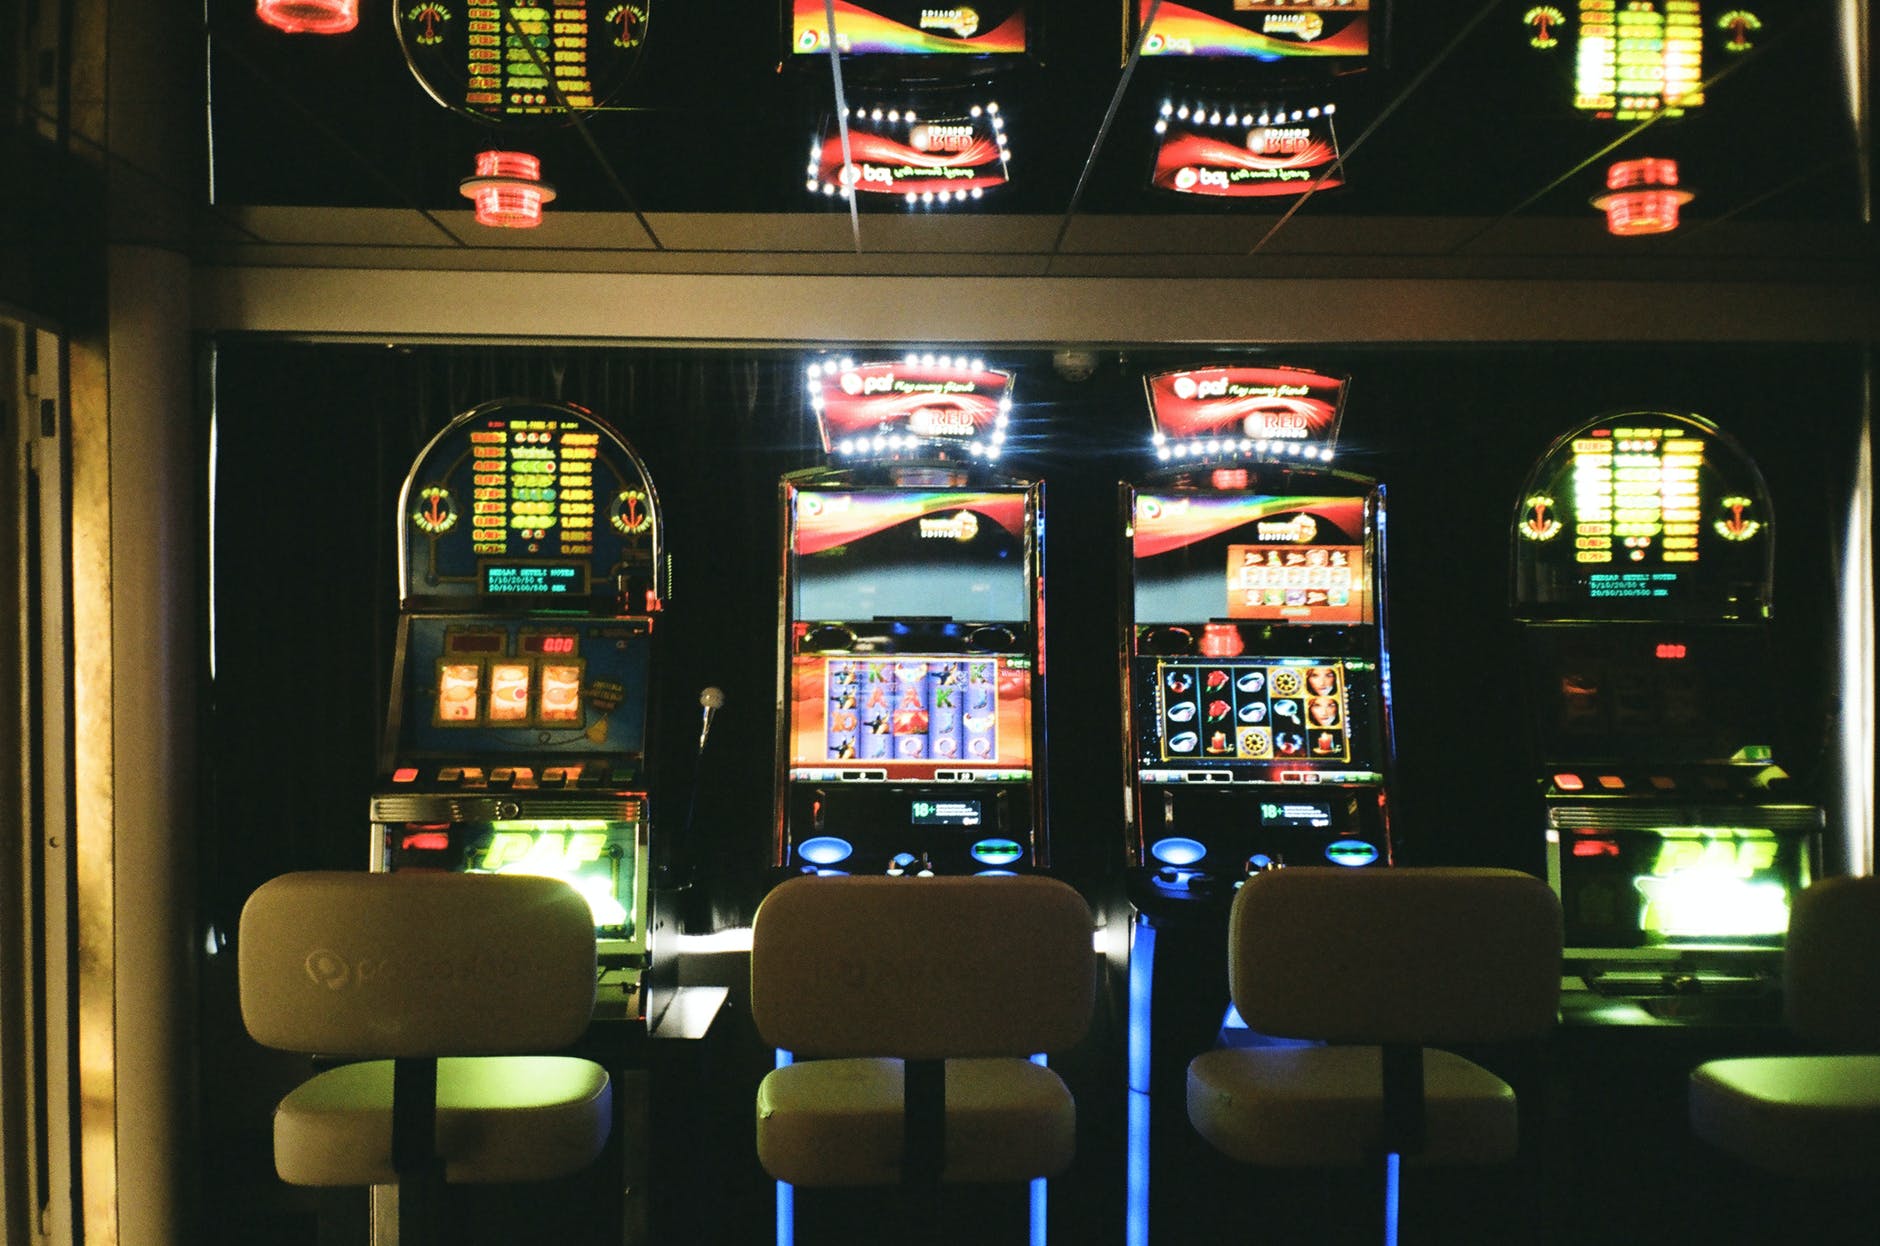 Tips for playing slots at casinos